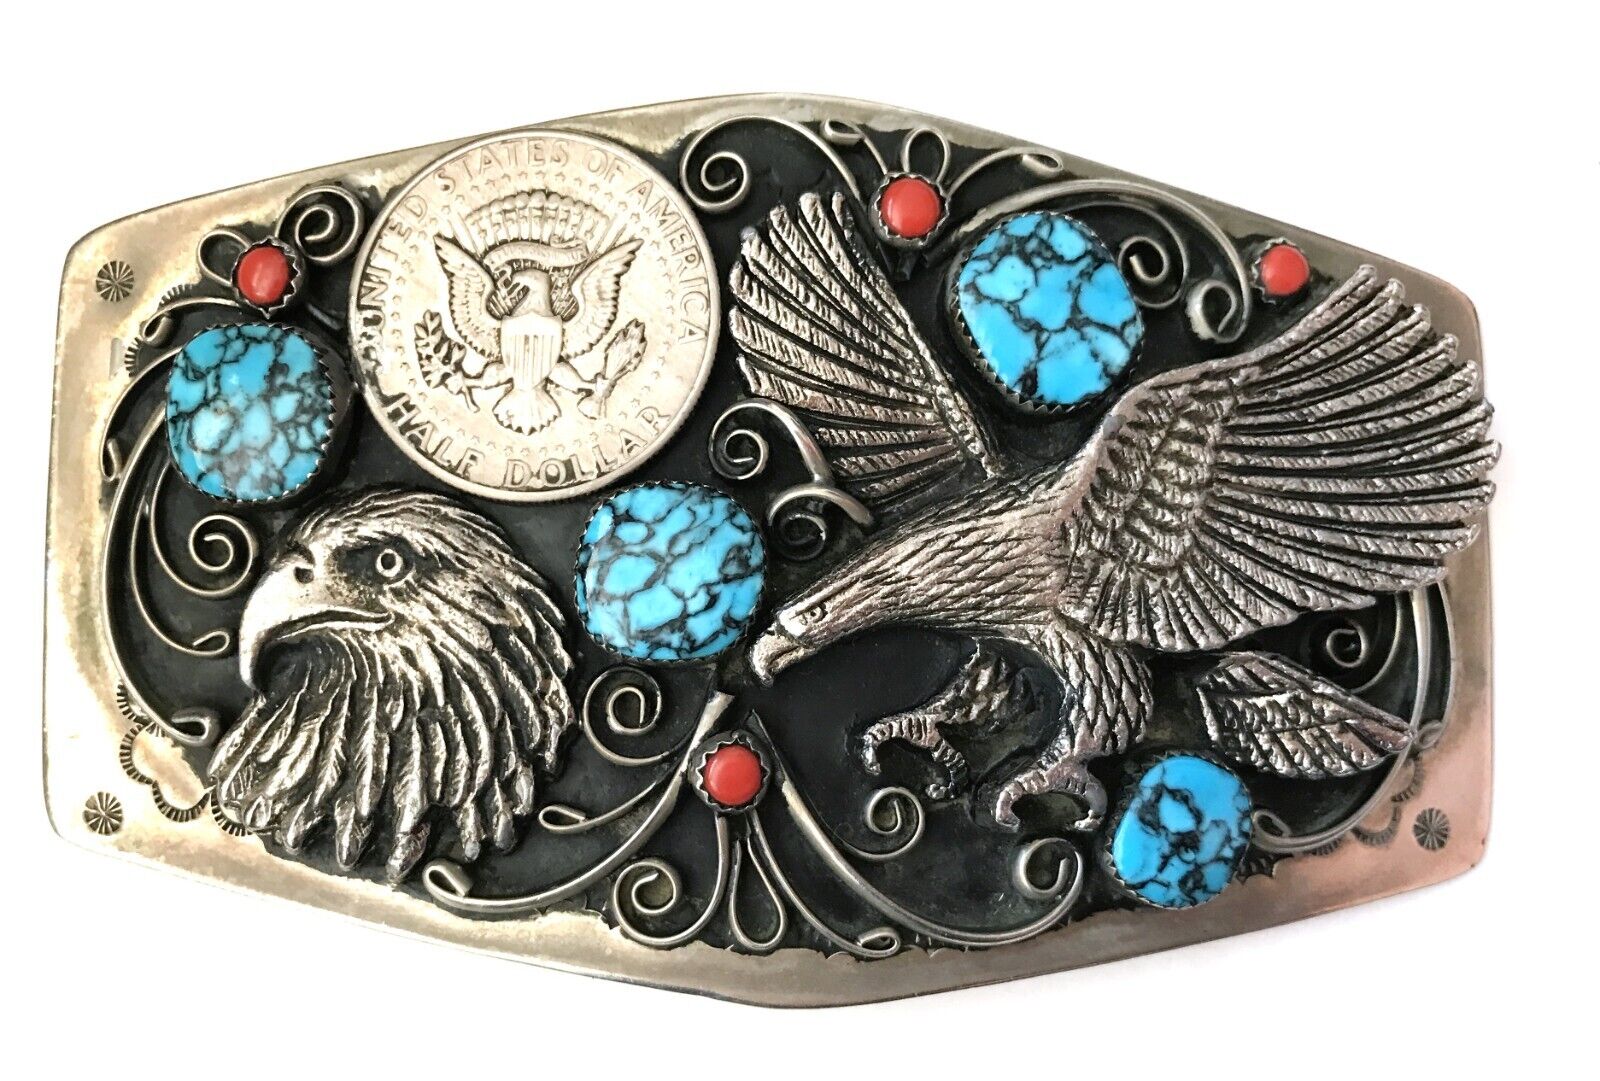 Large 6 Sided German Silver Belt Buckle 2 Eagles Half Dollar Turquoise Red Coral